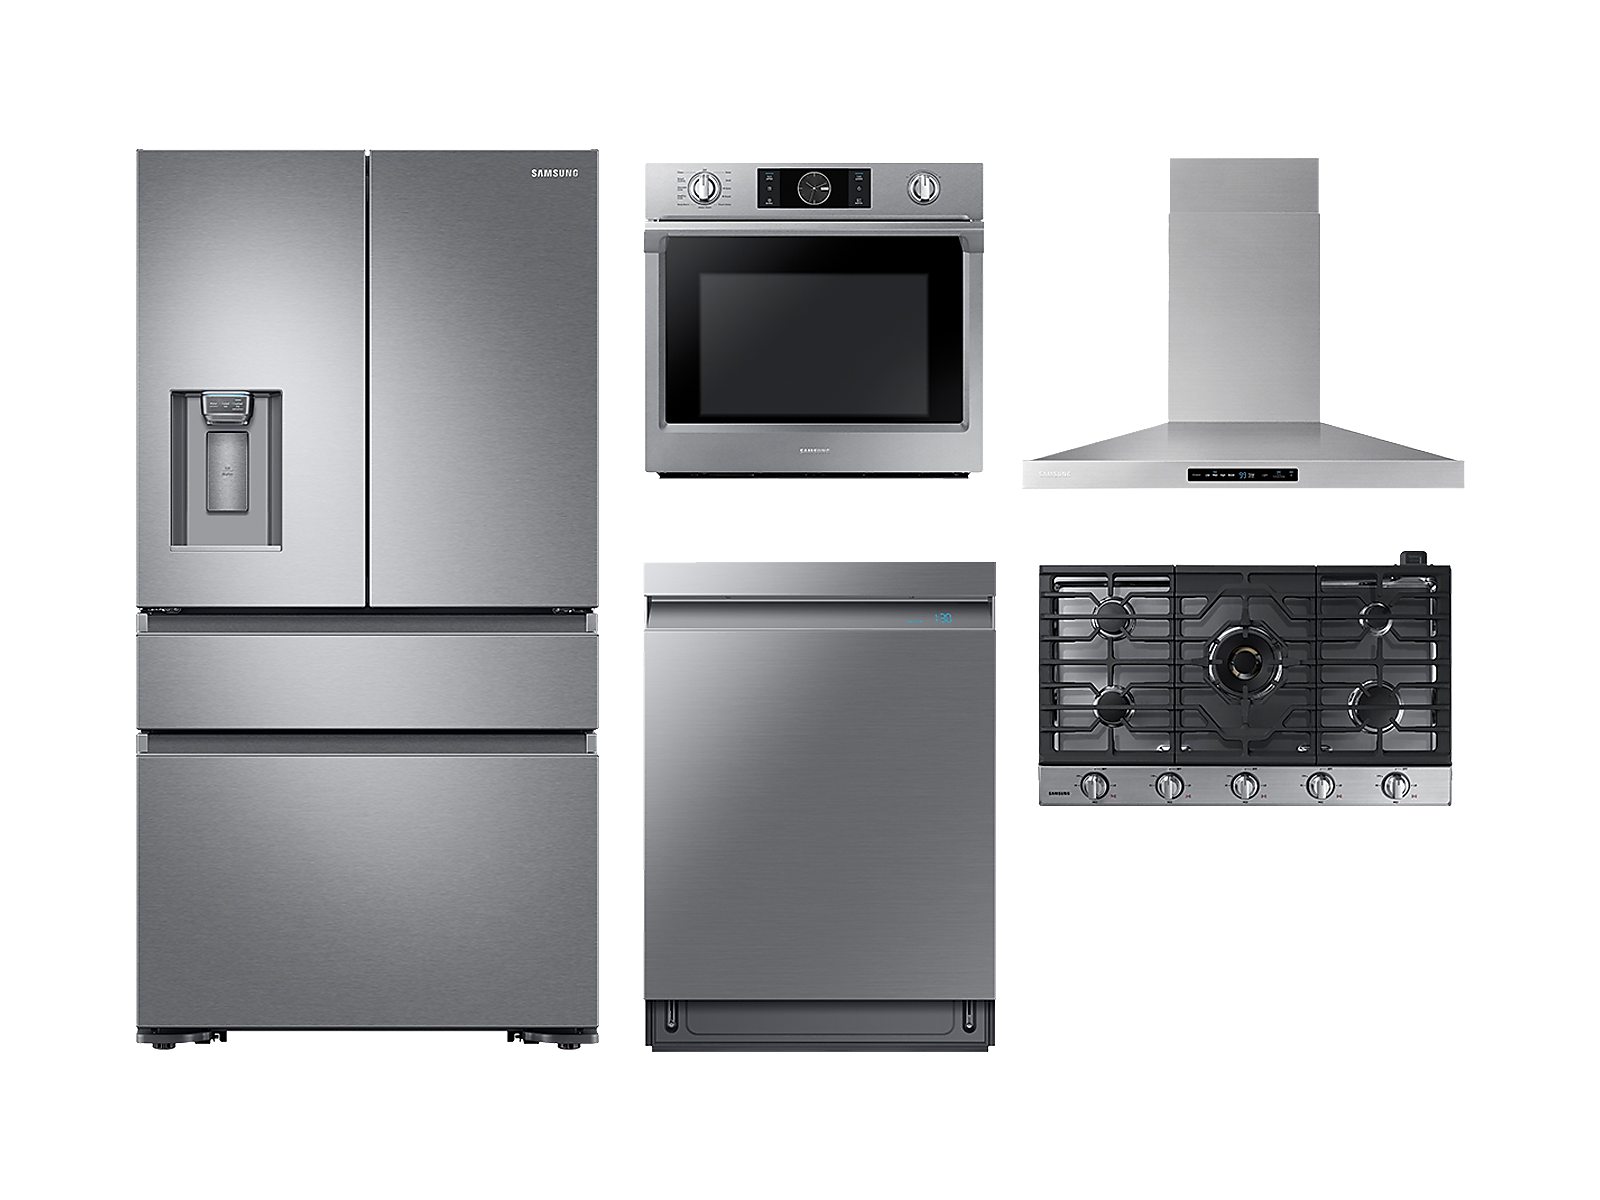 Samsung 4-door Refrigerator + Single Wall Oven + Gas Cooktop + Hood + Linear Wash Dishwasher in Stainless Steel(BNDL-1561033323864) photo